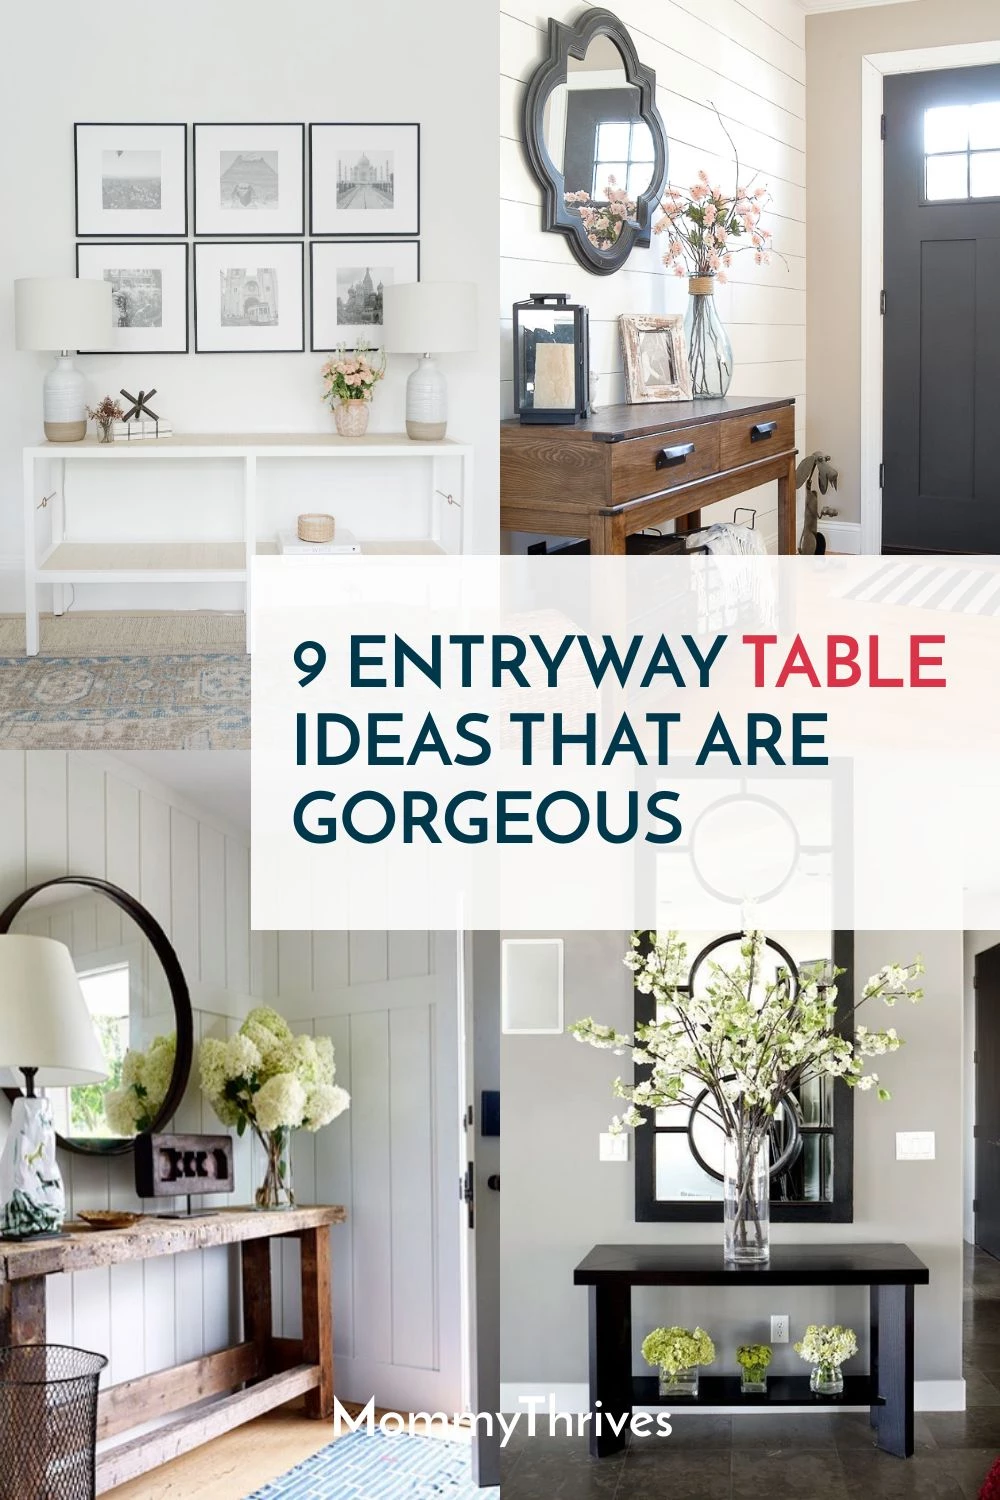 Beautiful Entryway Ideas For Every Style Entryway Ideas For Your Home How To Style A Beautiful Entryway Table.webp